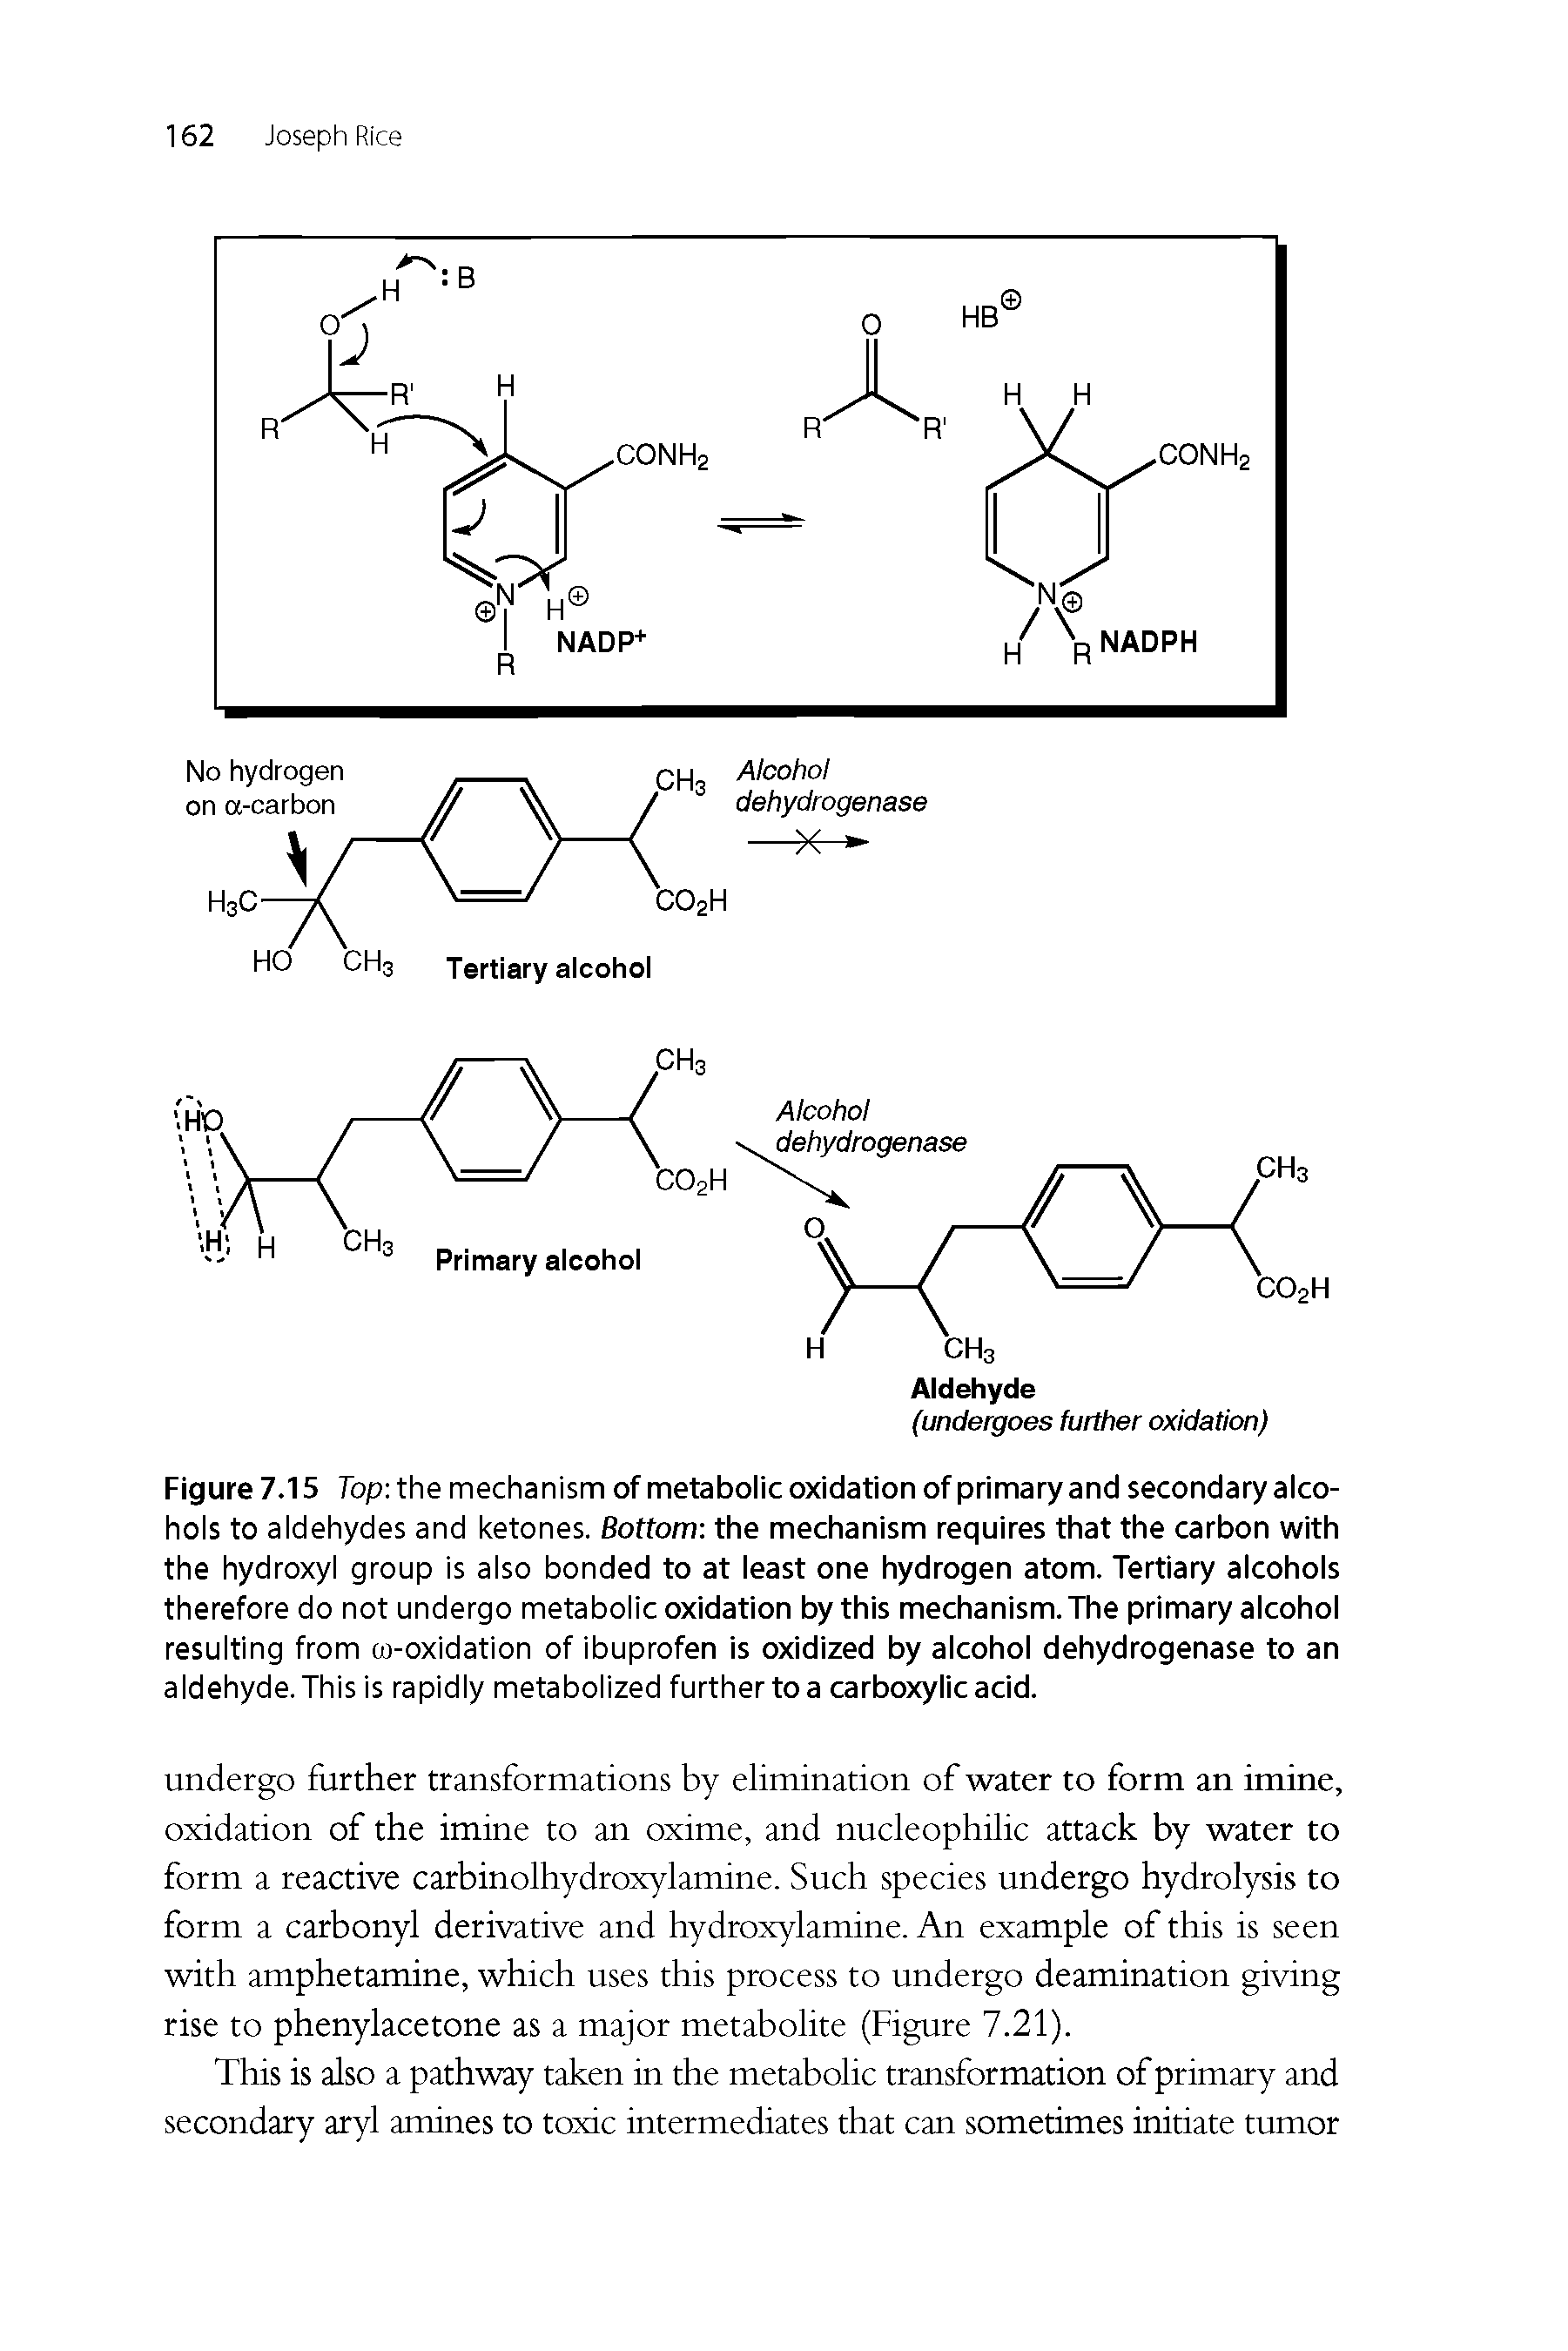 Figure 7.15 Top the mechanism of metabolic oxidation of primary and secondary alcohols to aldehydes and ketones. Bottom the mechanism requires that the carbon with the hydroxyl group is also bonded to at least one hydrogen atom. Tertiary alcohols therefore do not undergo metabolic oxidation by this mechanism. The primary alcohol resulting from co-oxidation of ibuprofen is oxidized by alcohol dehydrogenase to an aldehyde. This is rapidly metabolized further to a carboxylic acid.